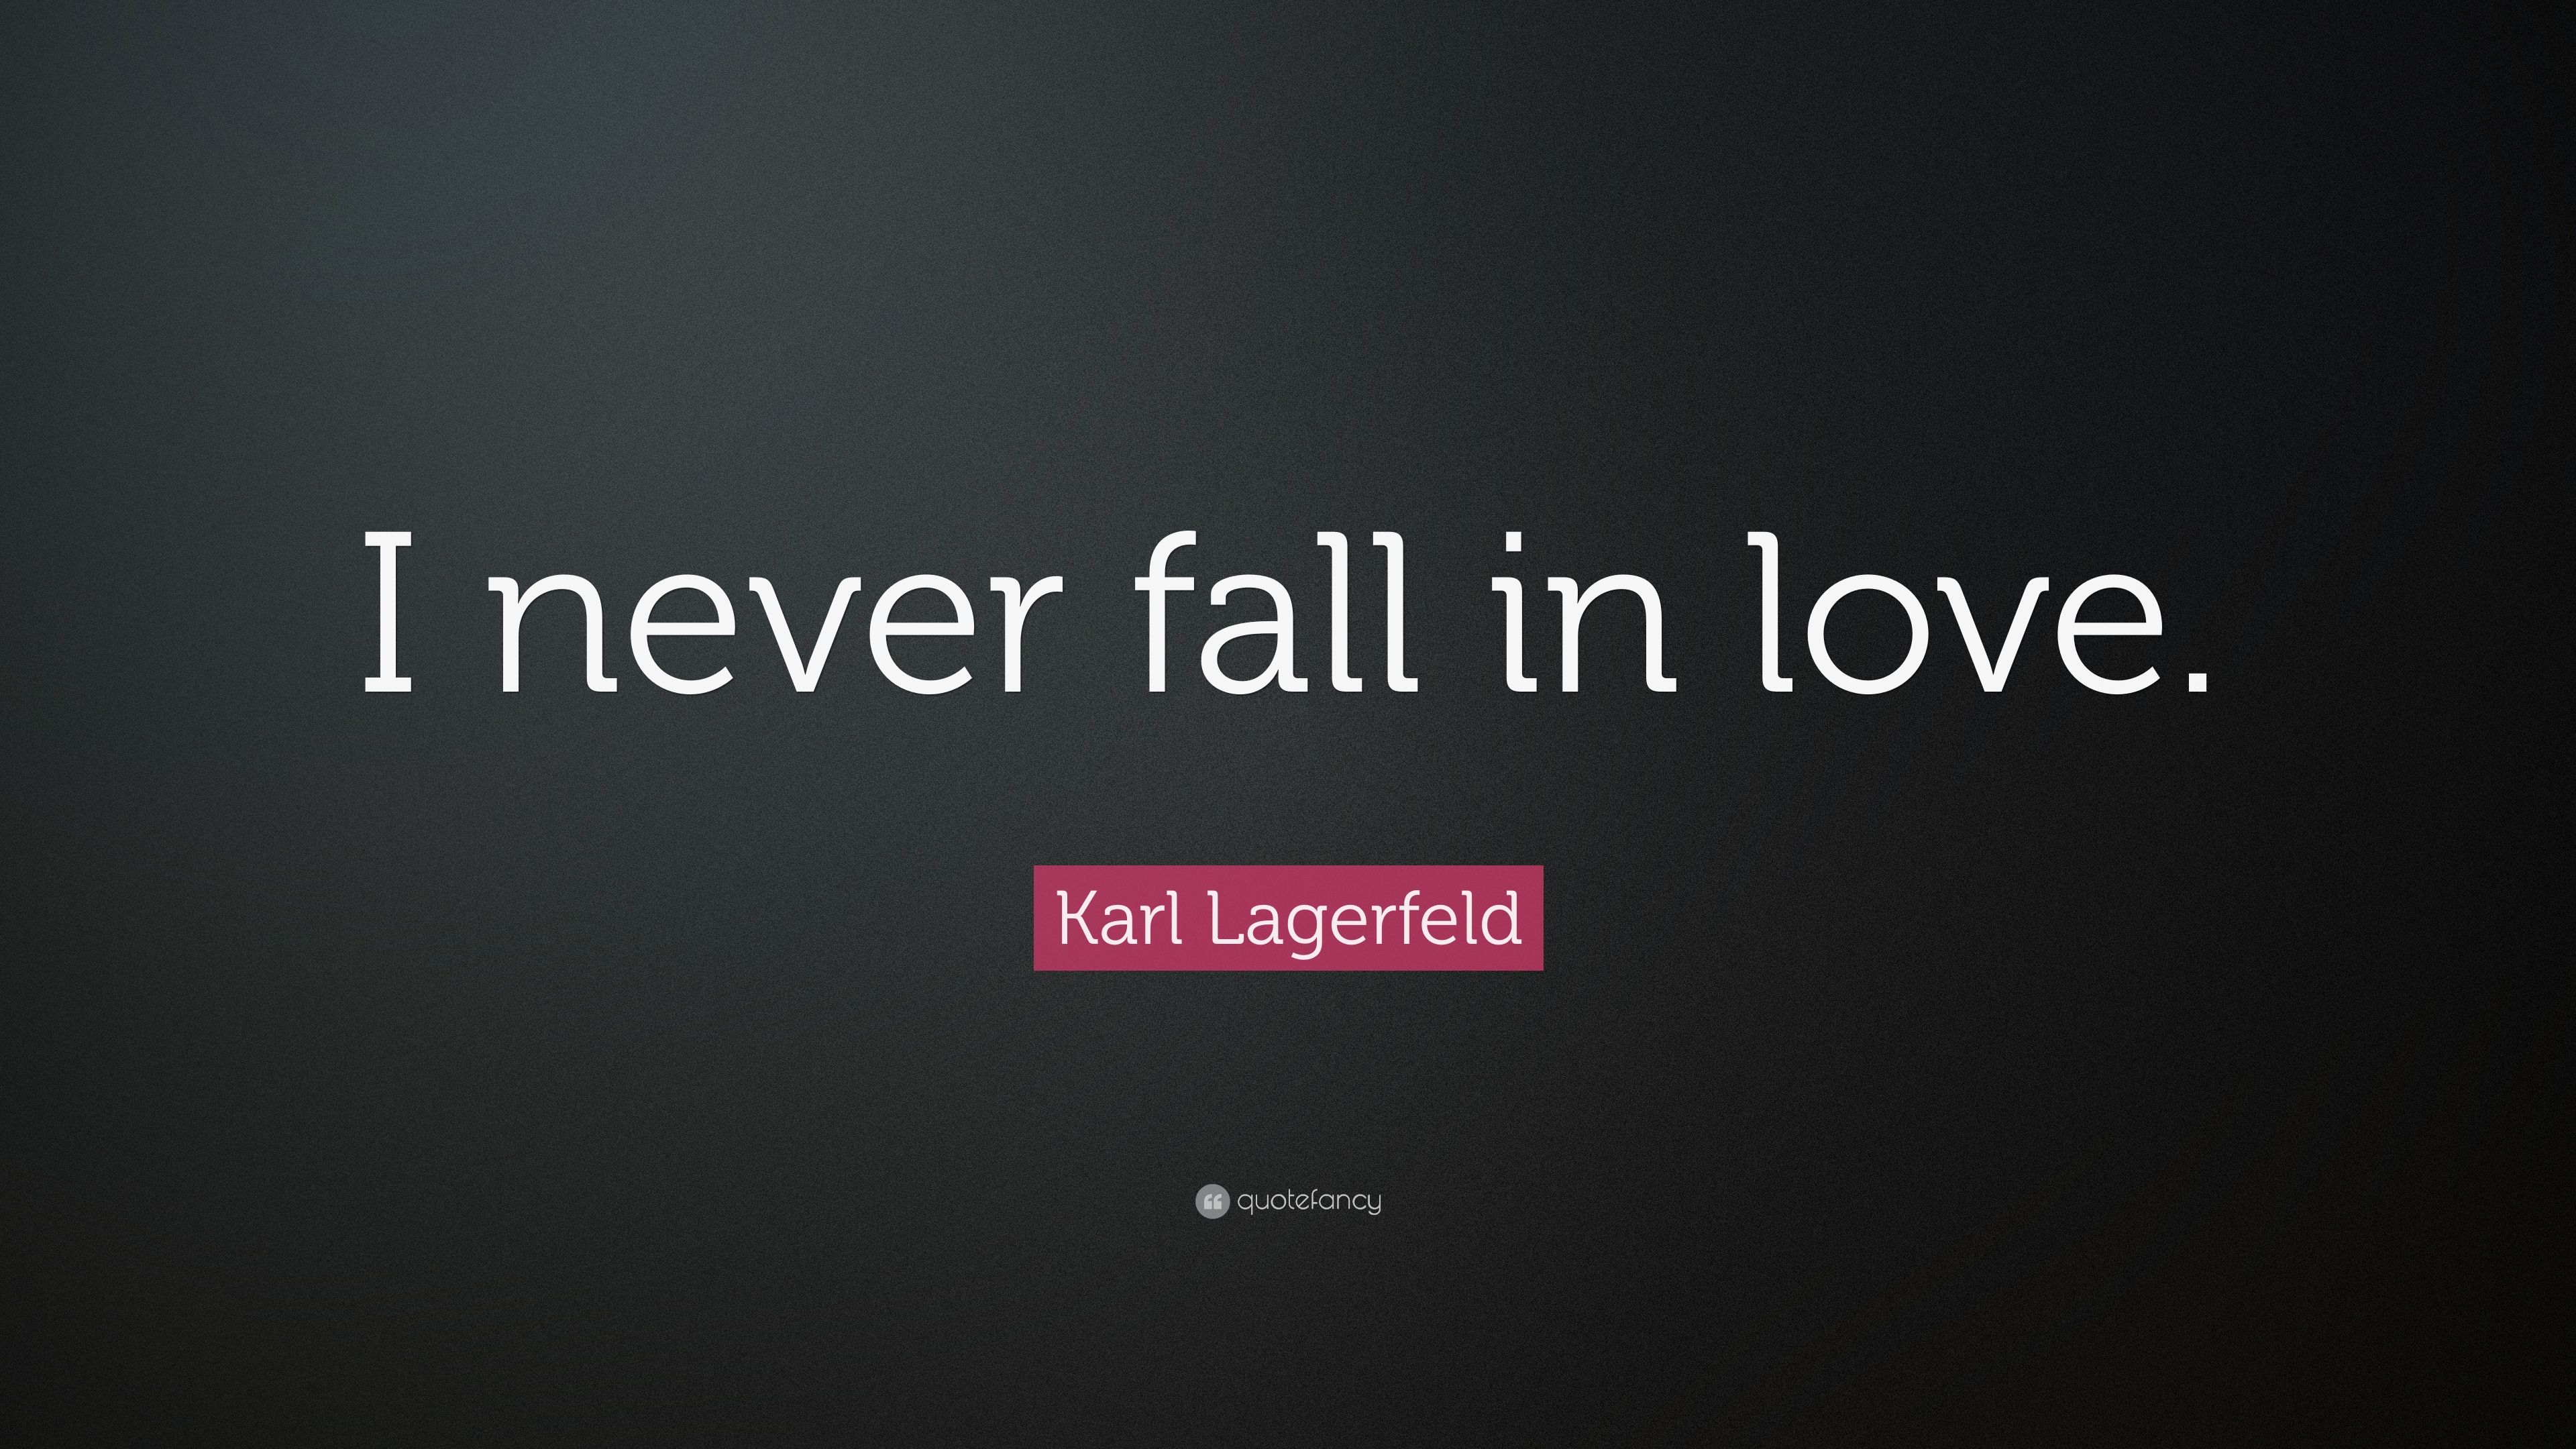 Karl Lagerfeld Quote: “I never fall in love.” 12 wallpaper